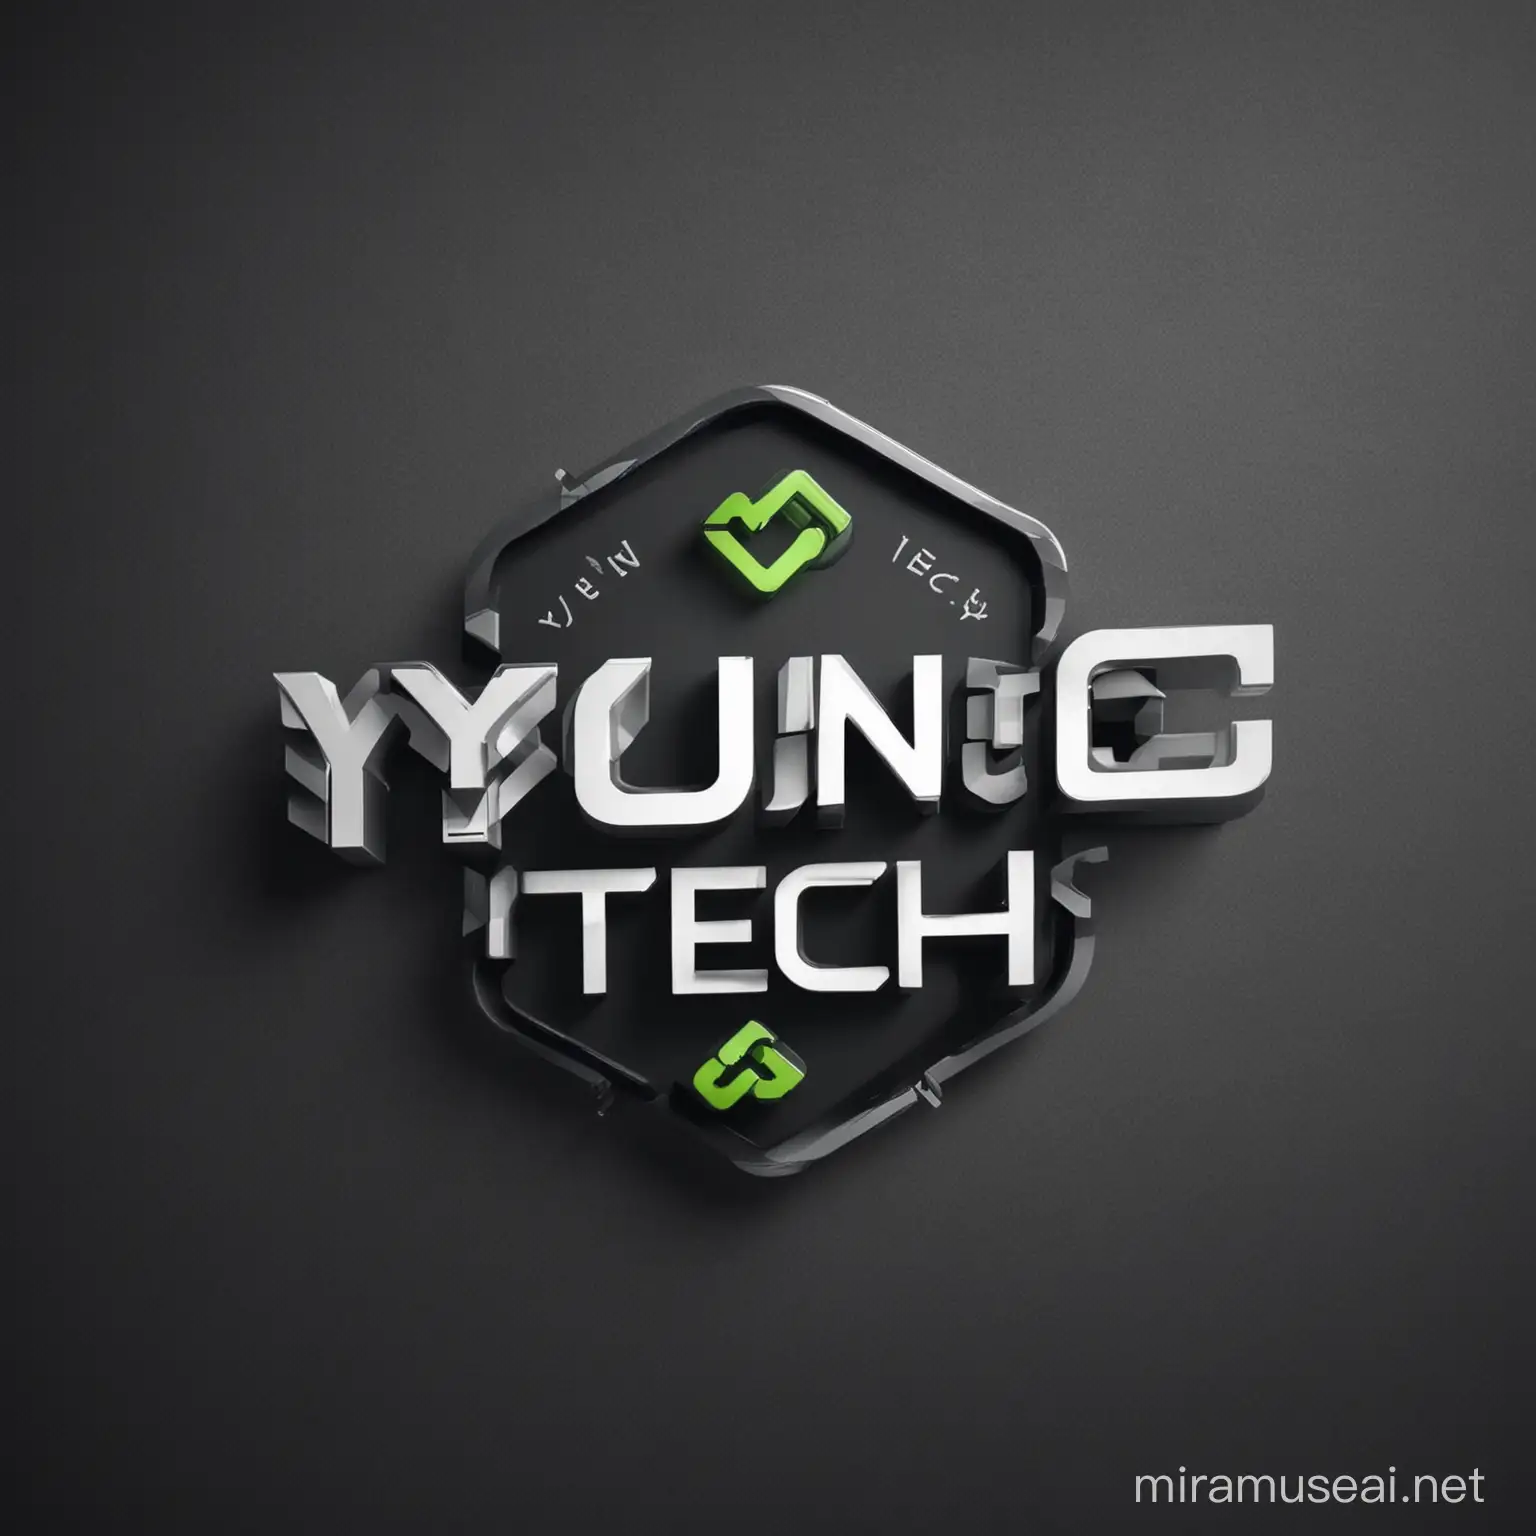 just give me good looking logo "YOUNG TECH"